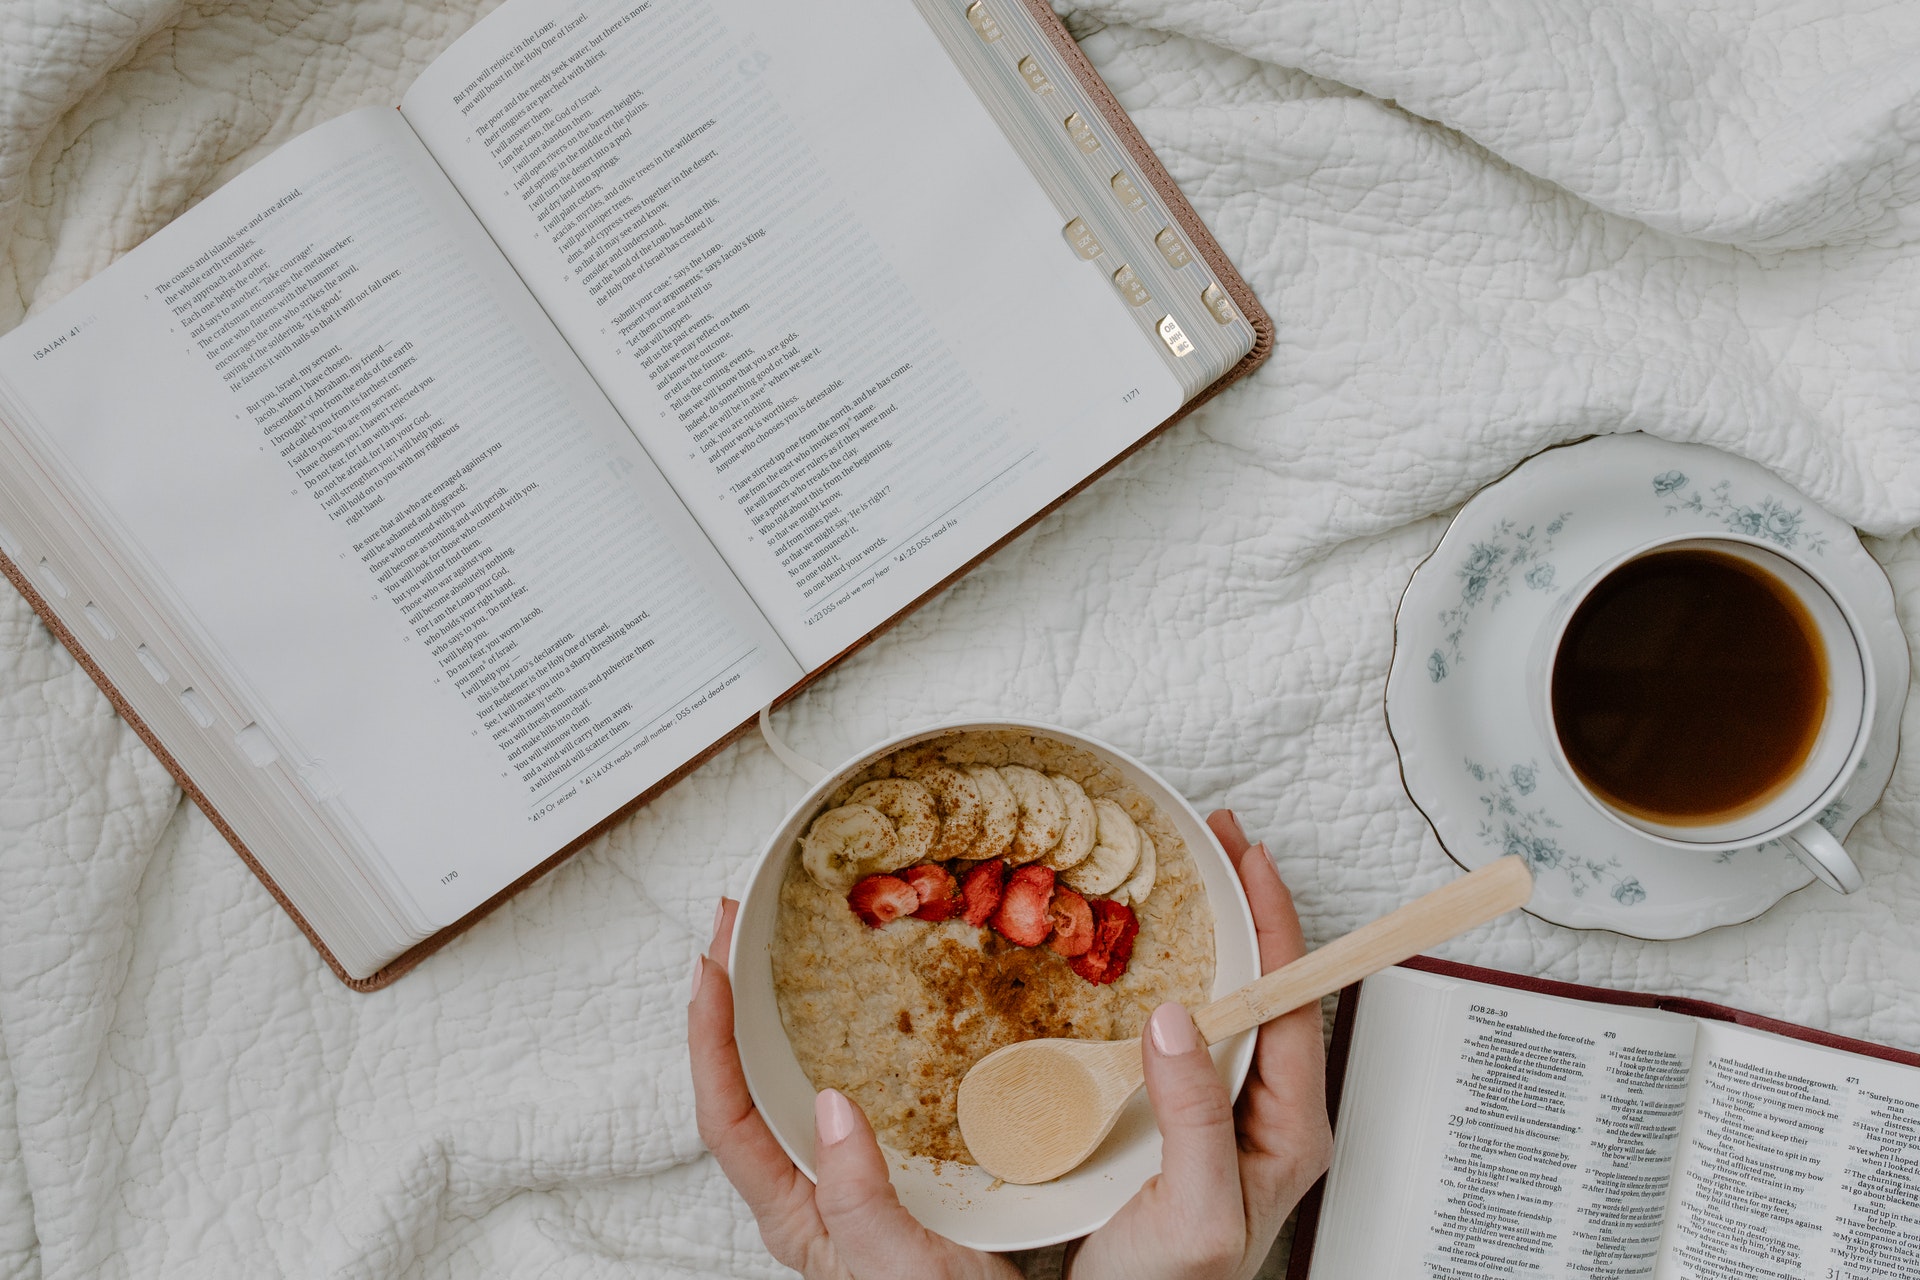 A bowl of oatmeal with coconut milk next to a cup of coffee and the Bible